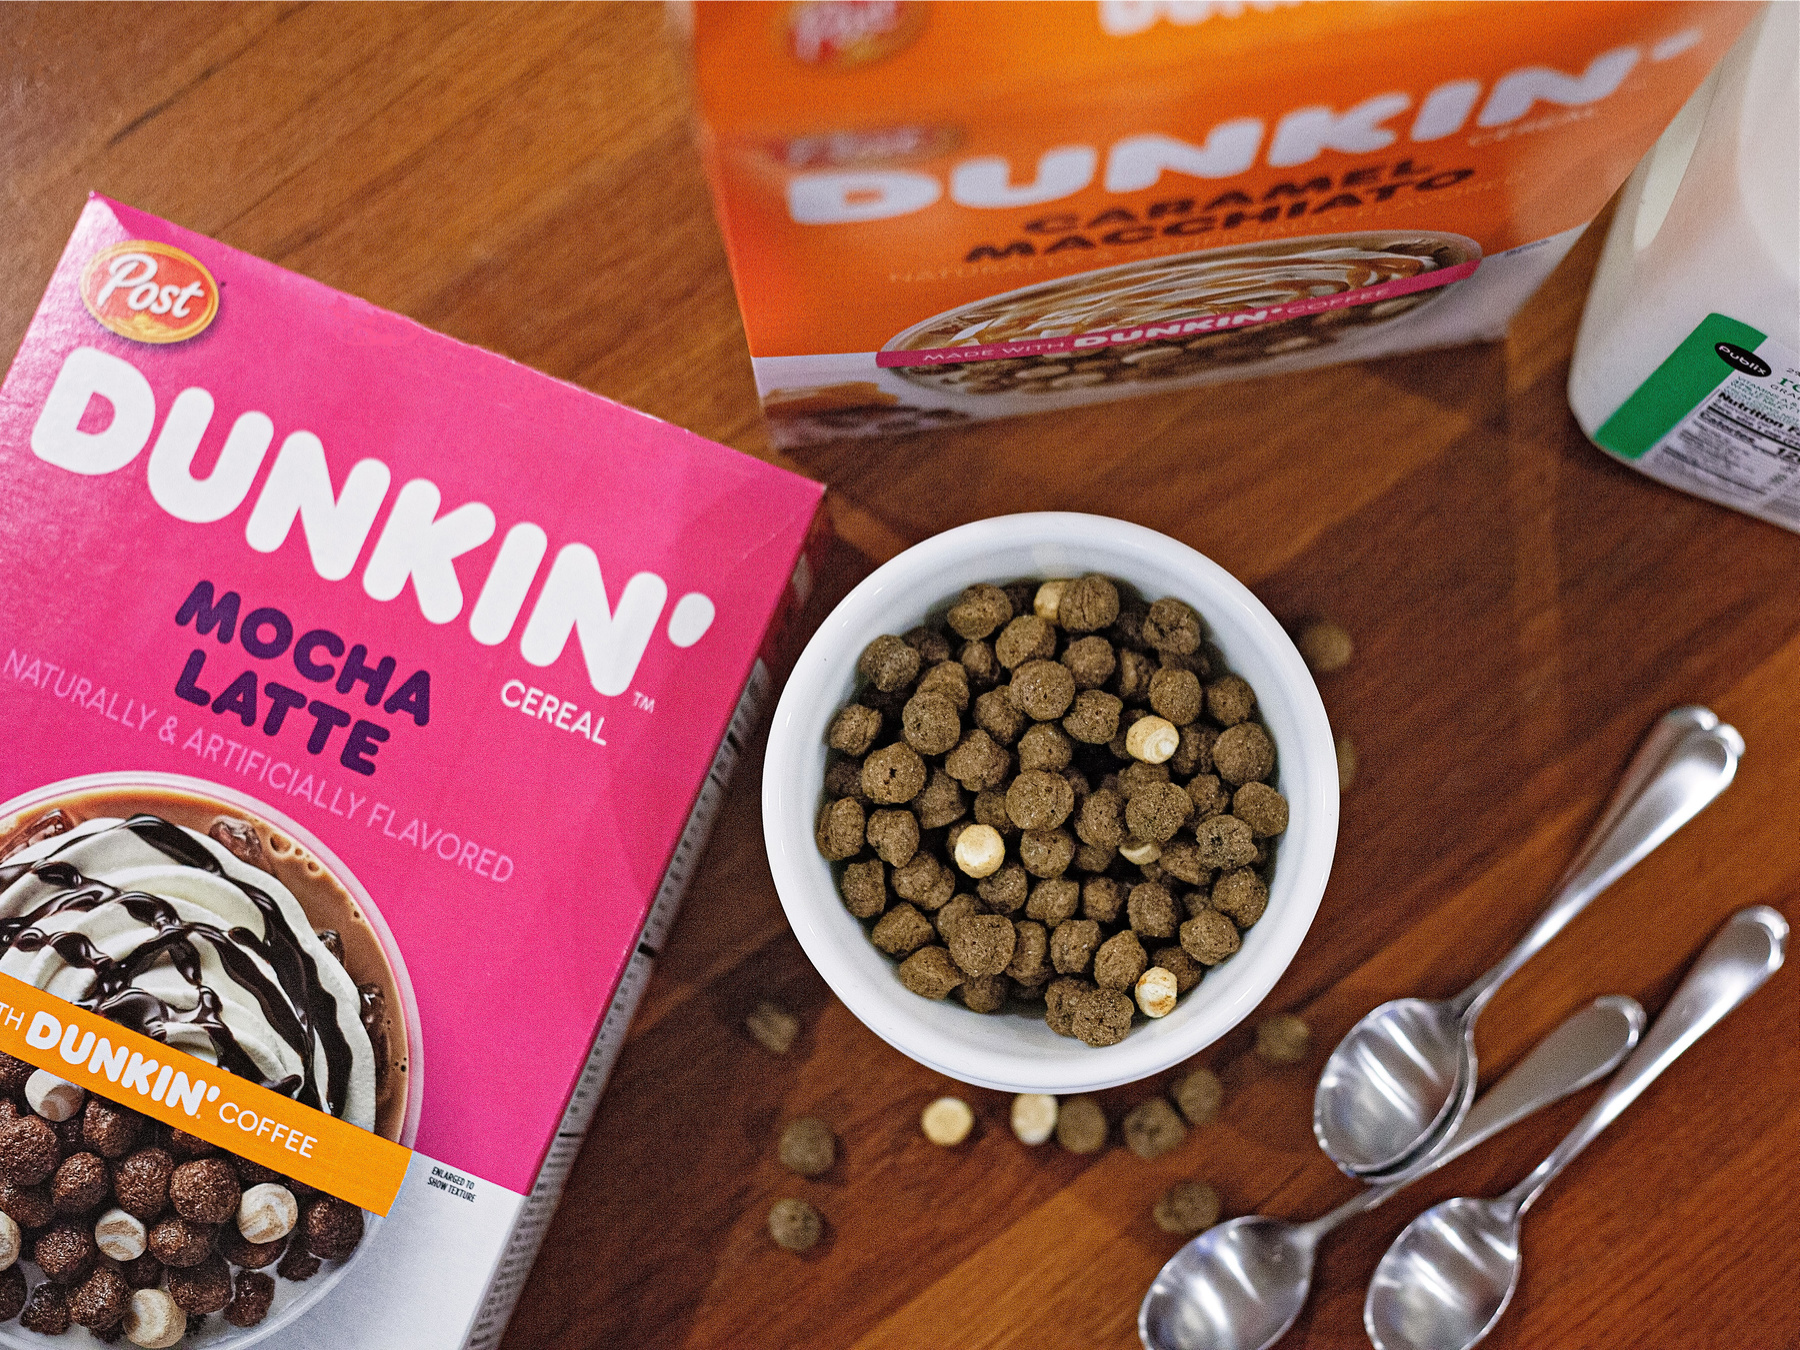 Don't Miss The Sale On Post Dunkin’ Cereal - Buy One, Get One FREE At Publix! on I Heart Publix